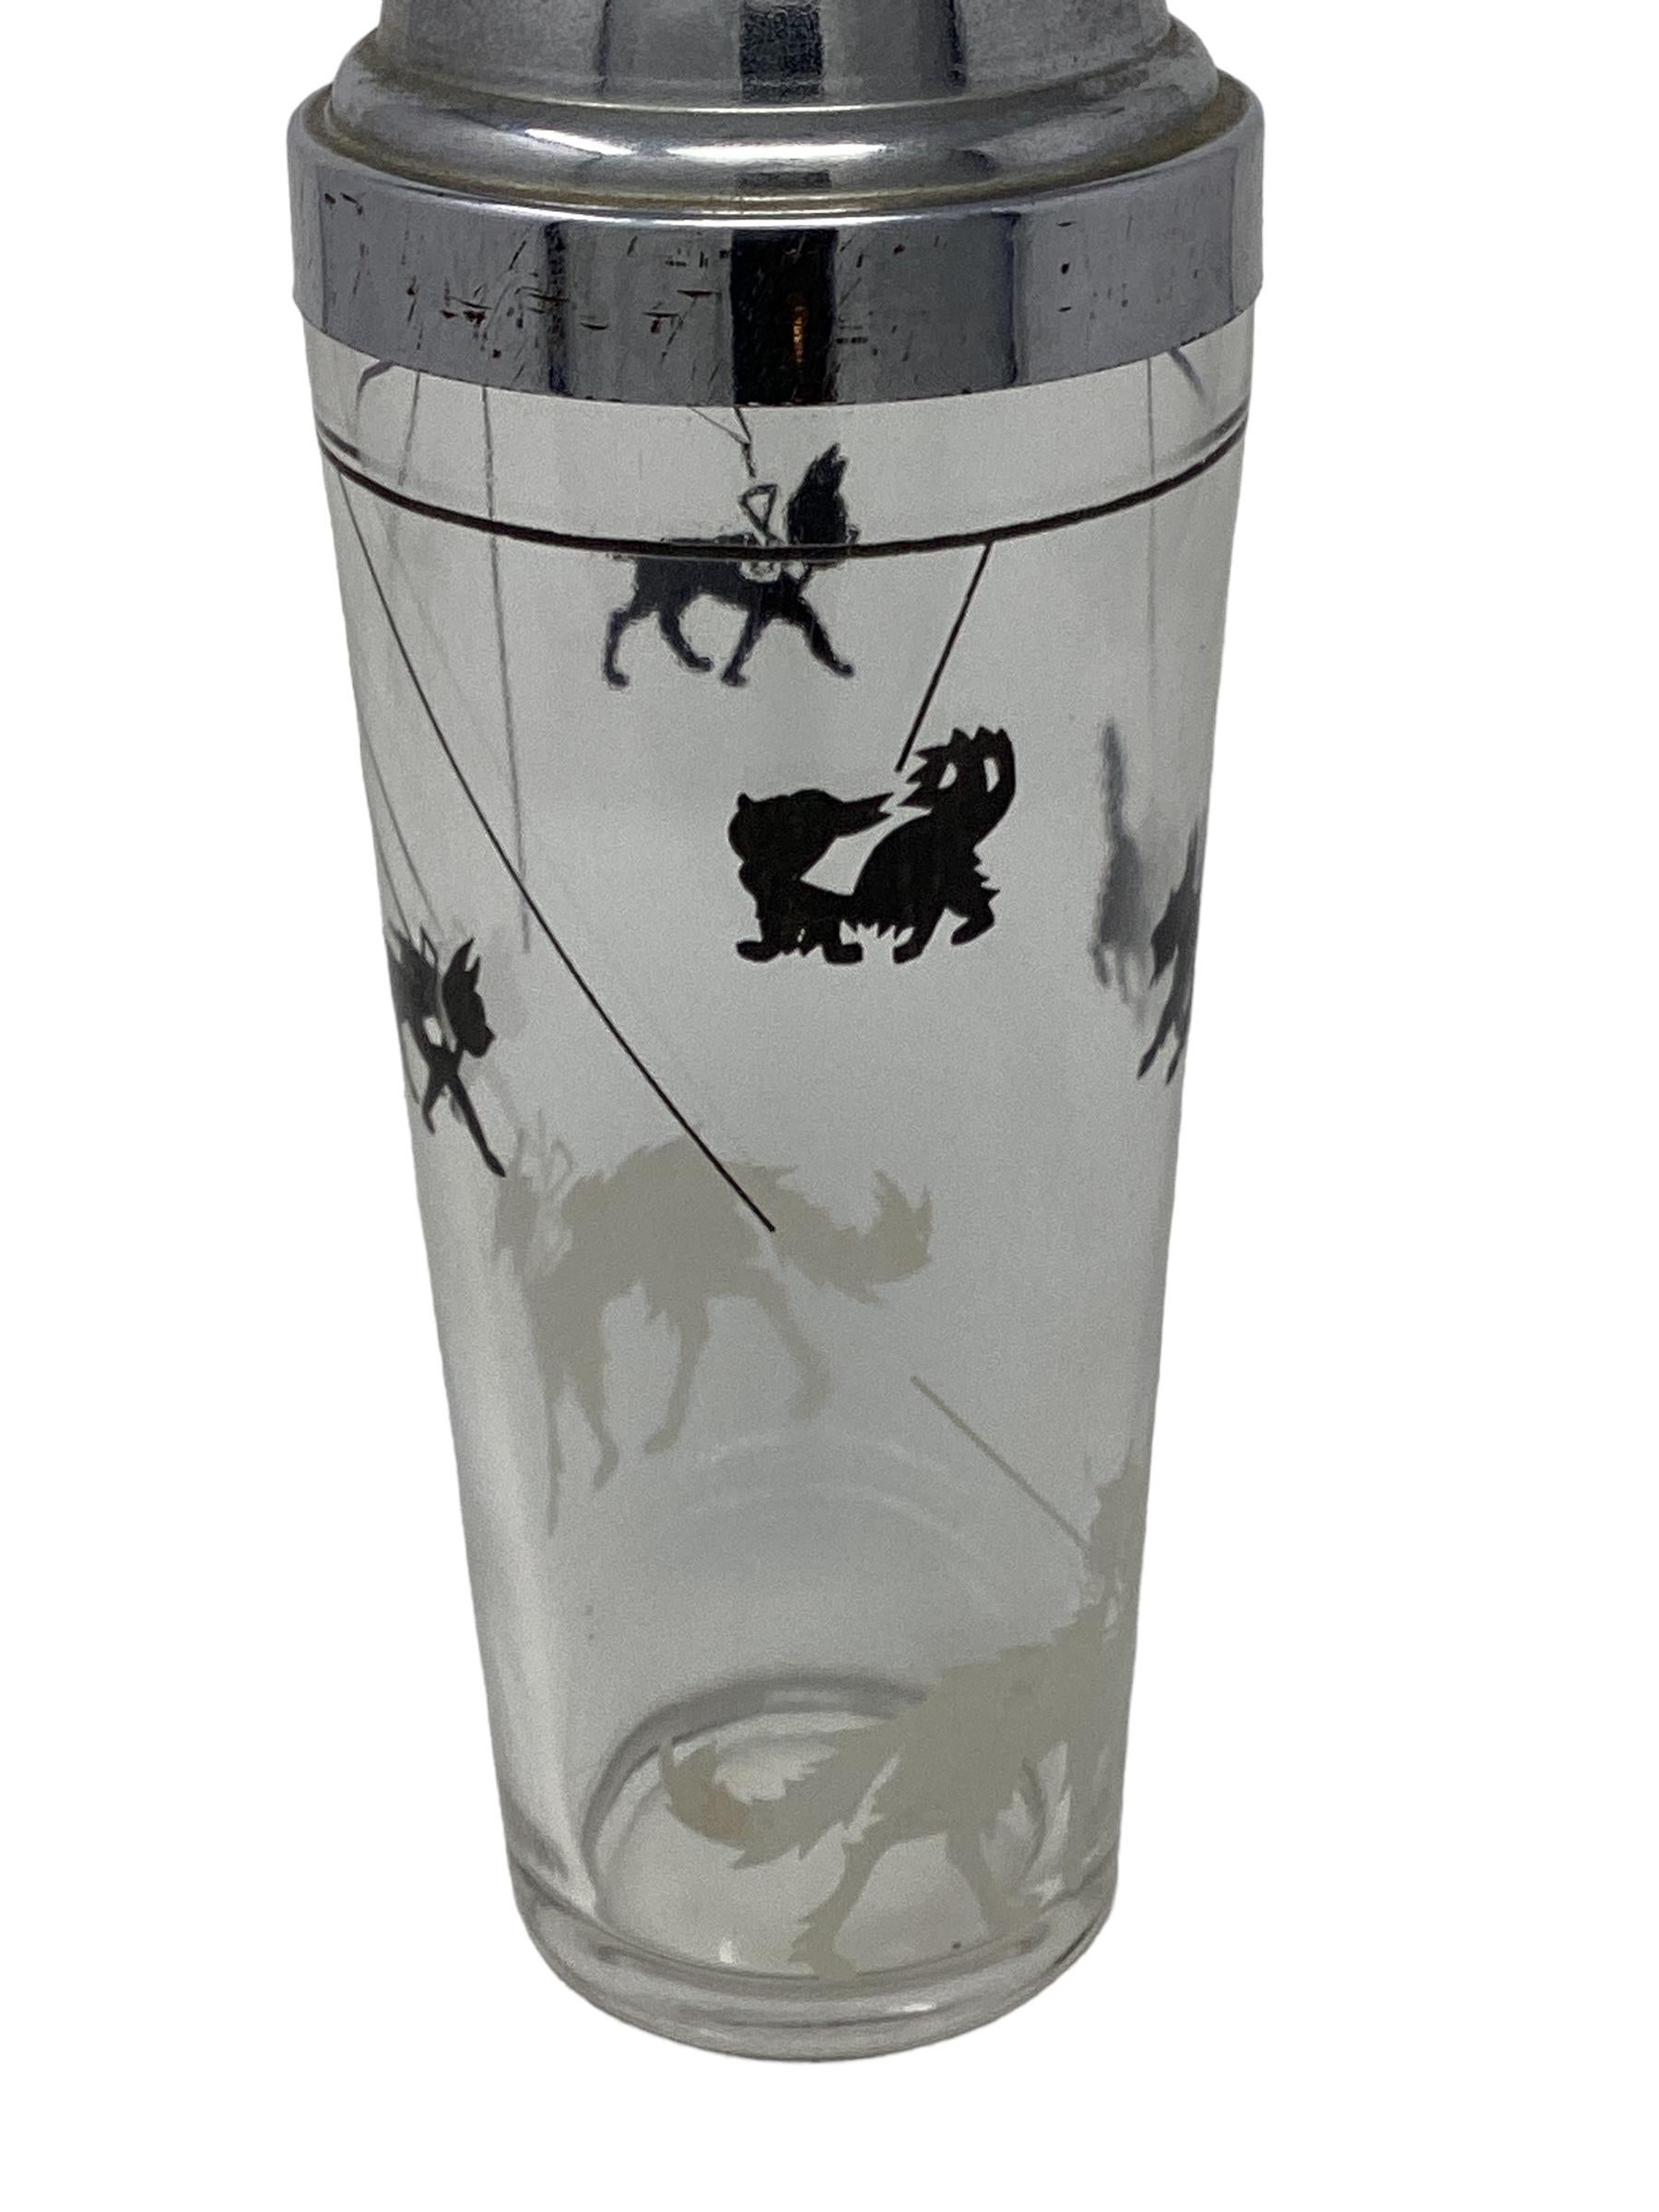 Art Deco Hazel-Atlas Cocktail Shaker with Leashed Dogs In Good Condition For Sale In Chapel Hill, NC